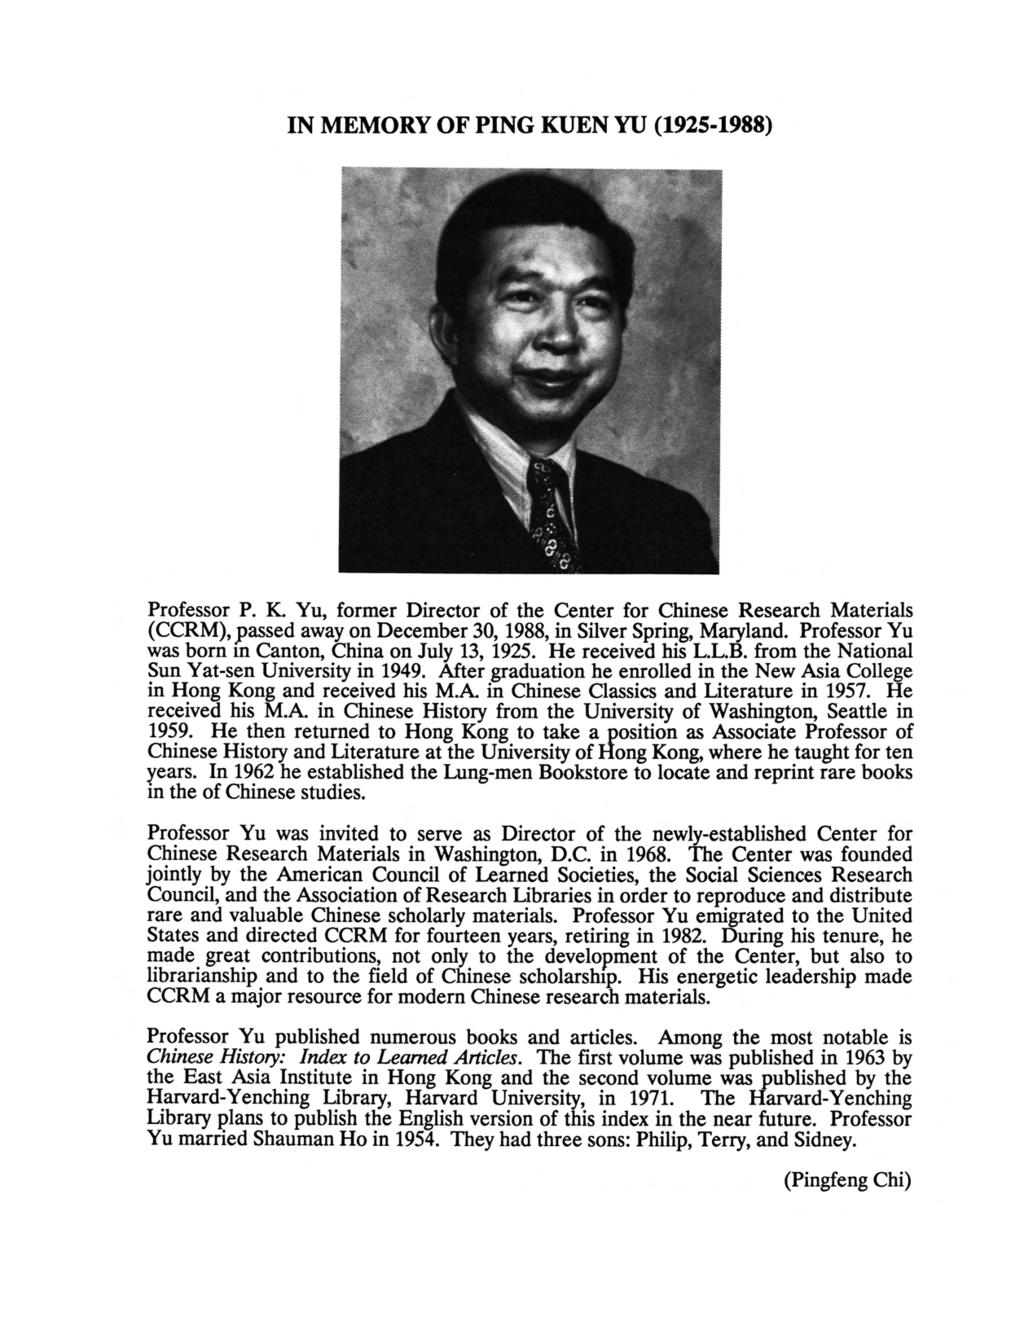 IN MEMORY OF PING KUEN YU (1925-1988) Professor P. K. Yu, former Director of the Center for Chinese Research Materials (CCRM), passed away on December 30,1988, in Silver Spring, Maryland.